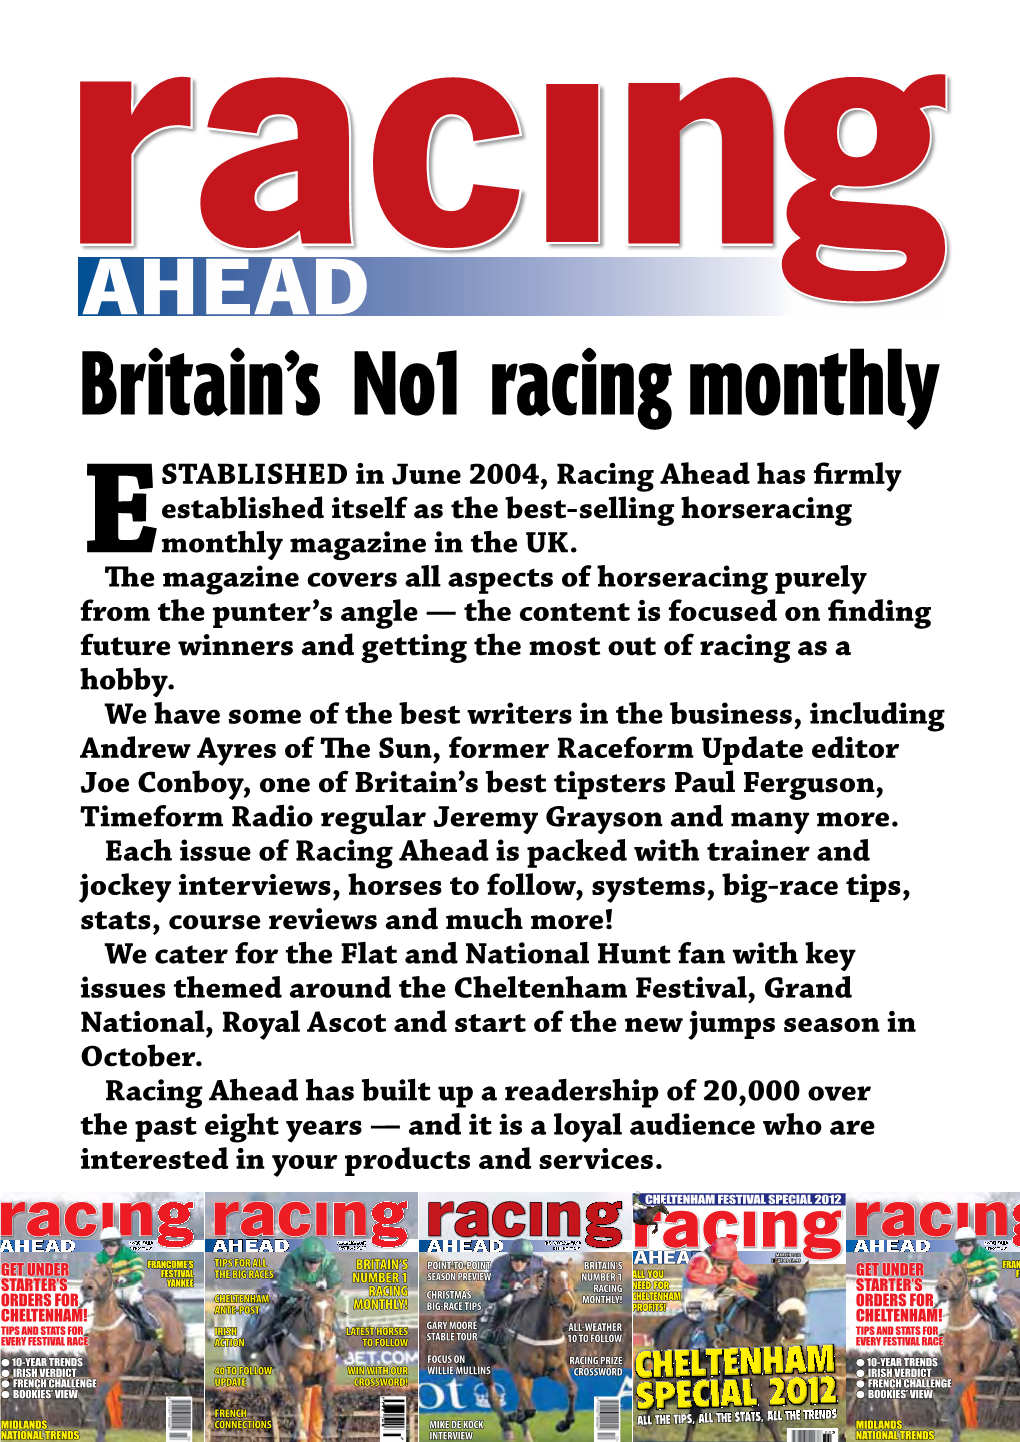 AHEAD Britain’S No1 Racing Monthly Stablished in June 2004, Racing Ahead Has Firmly Established Itself As the Best-Selling Horseracing Monthly Magazine in the UK